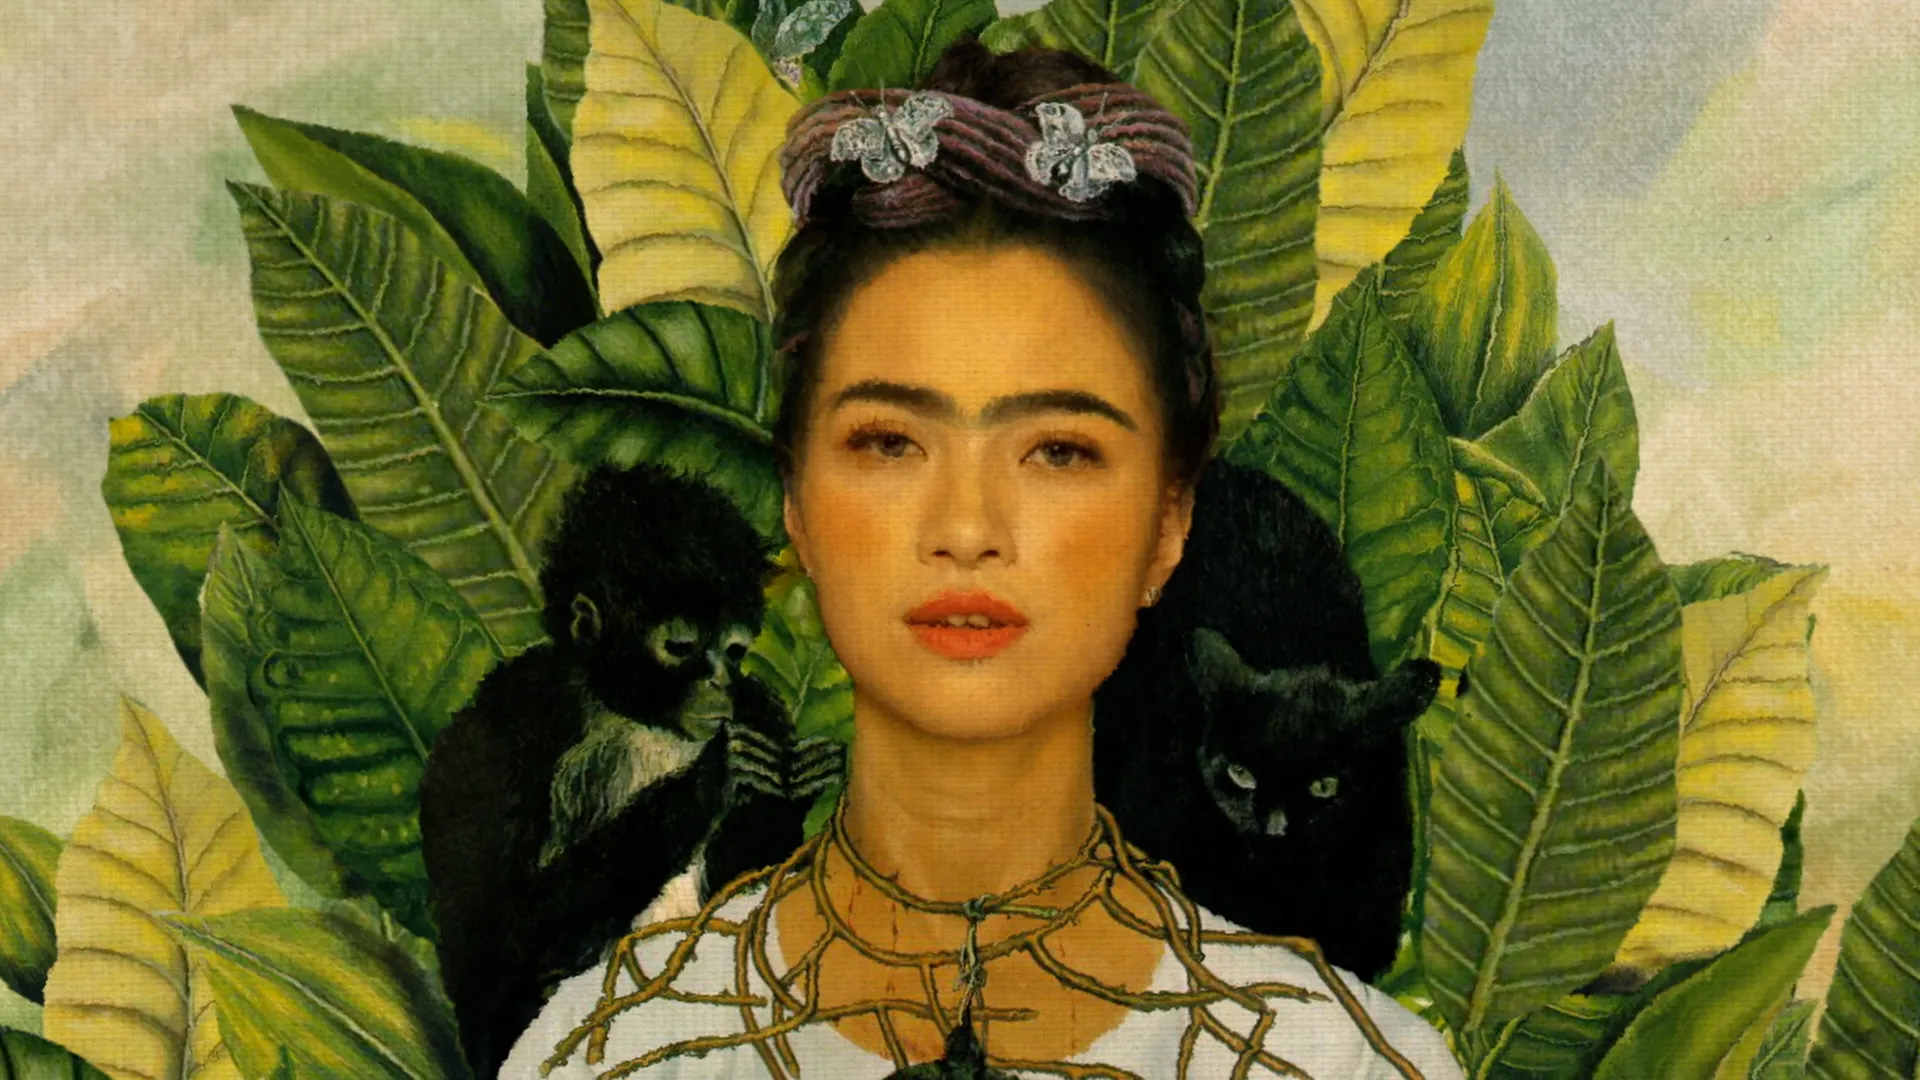 Frida Kahlo self portrait with necklace of thorns